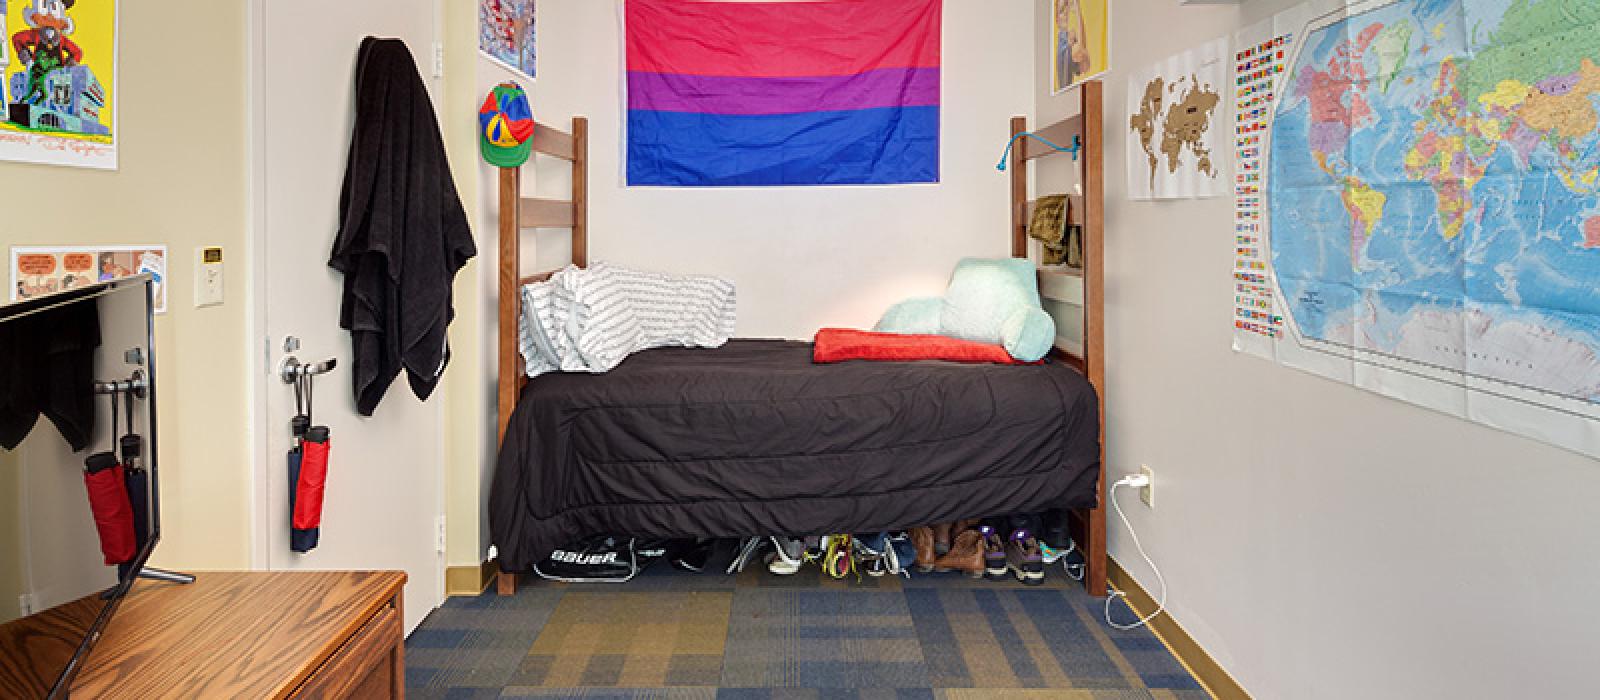 Furnished and decorated by a student bedroom.